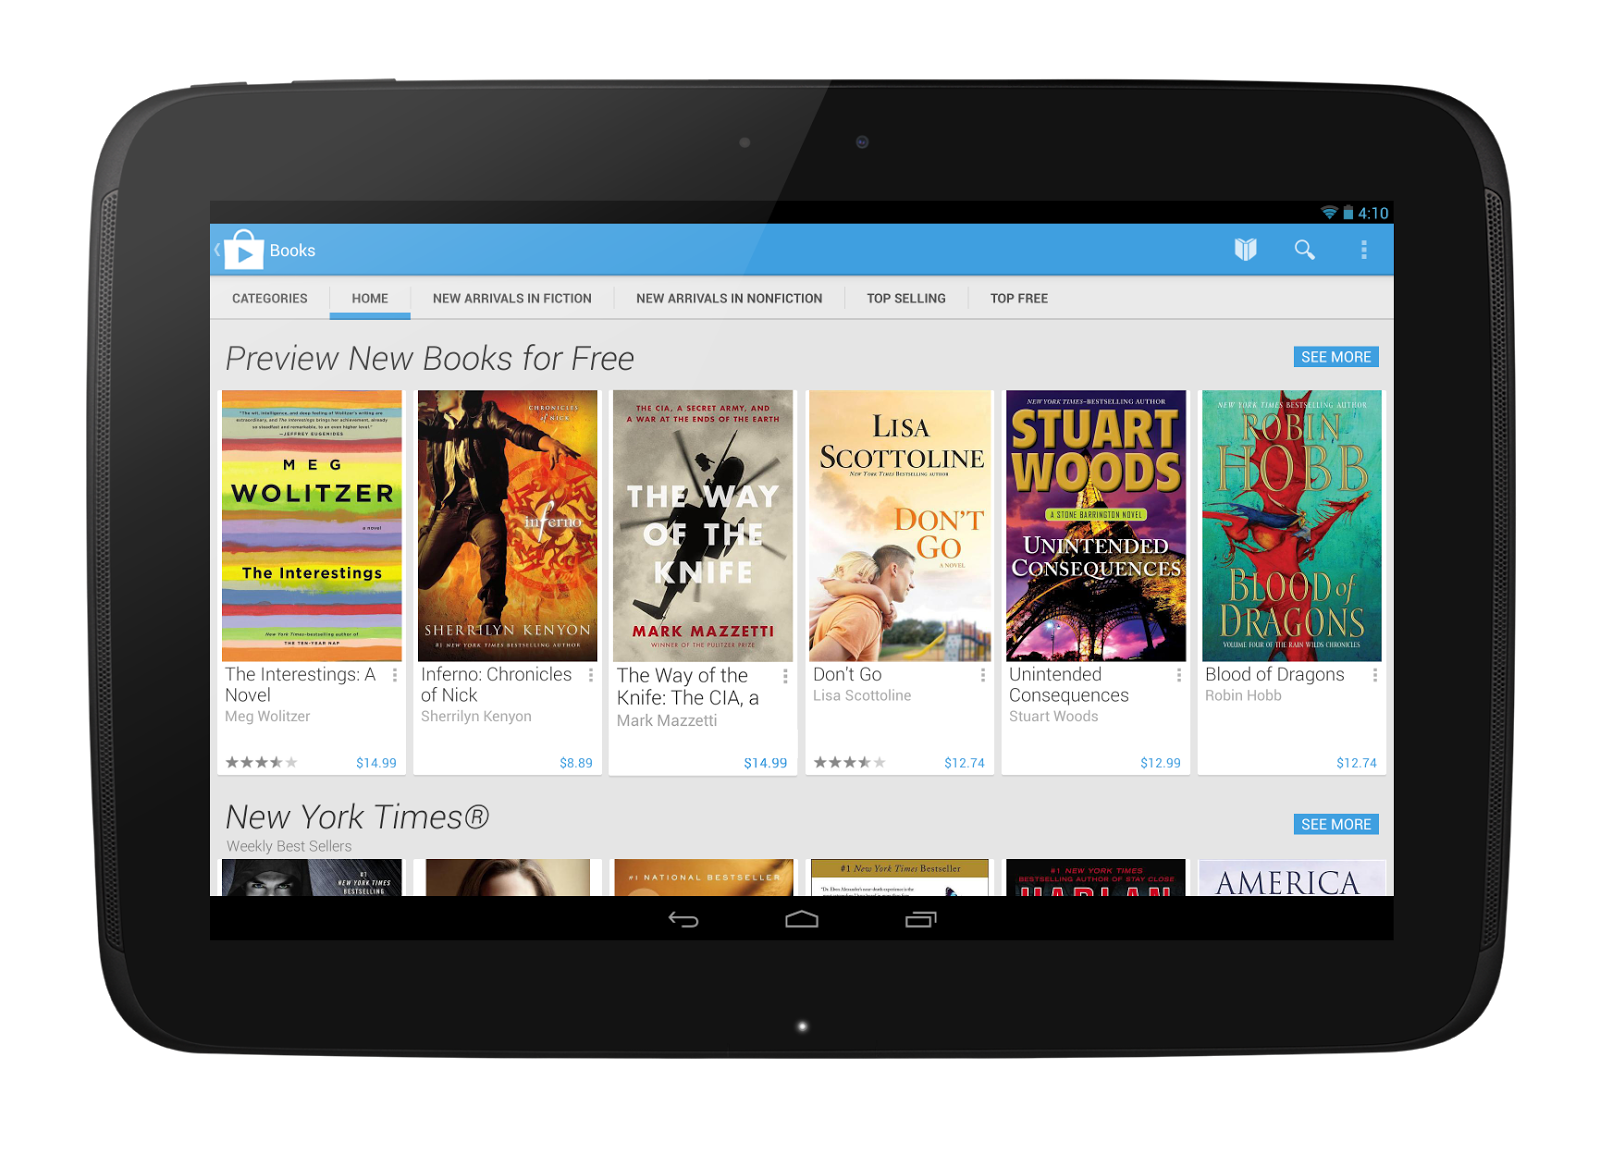 google play store 4.1.10 download and install on your android